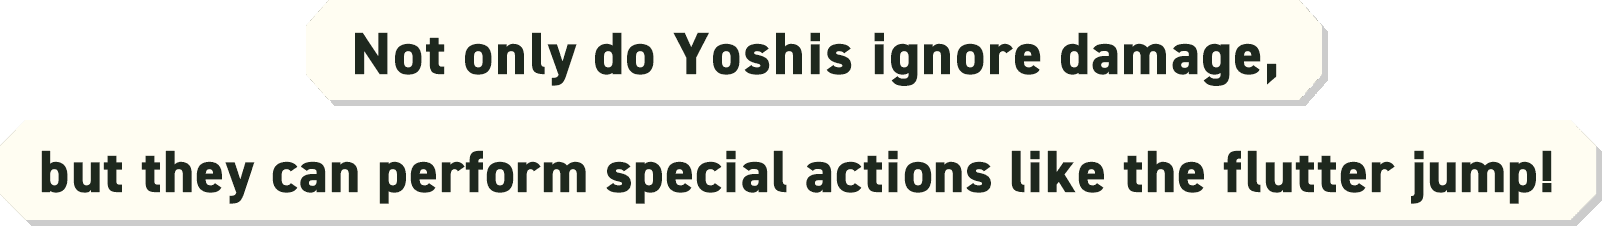 Not only do Yoshis ignore damage, but they can perform special actions like the flutter jump!